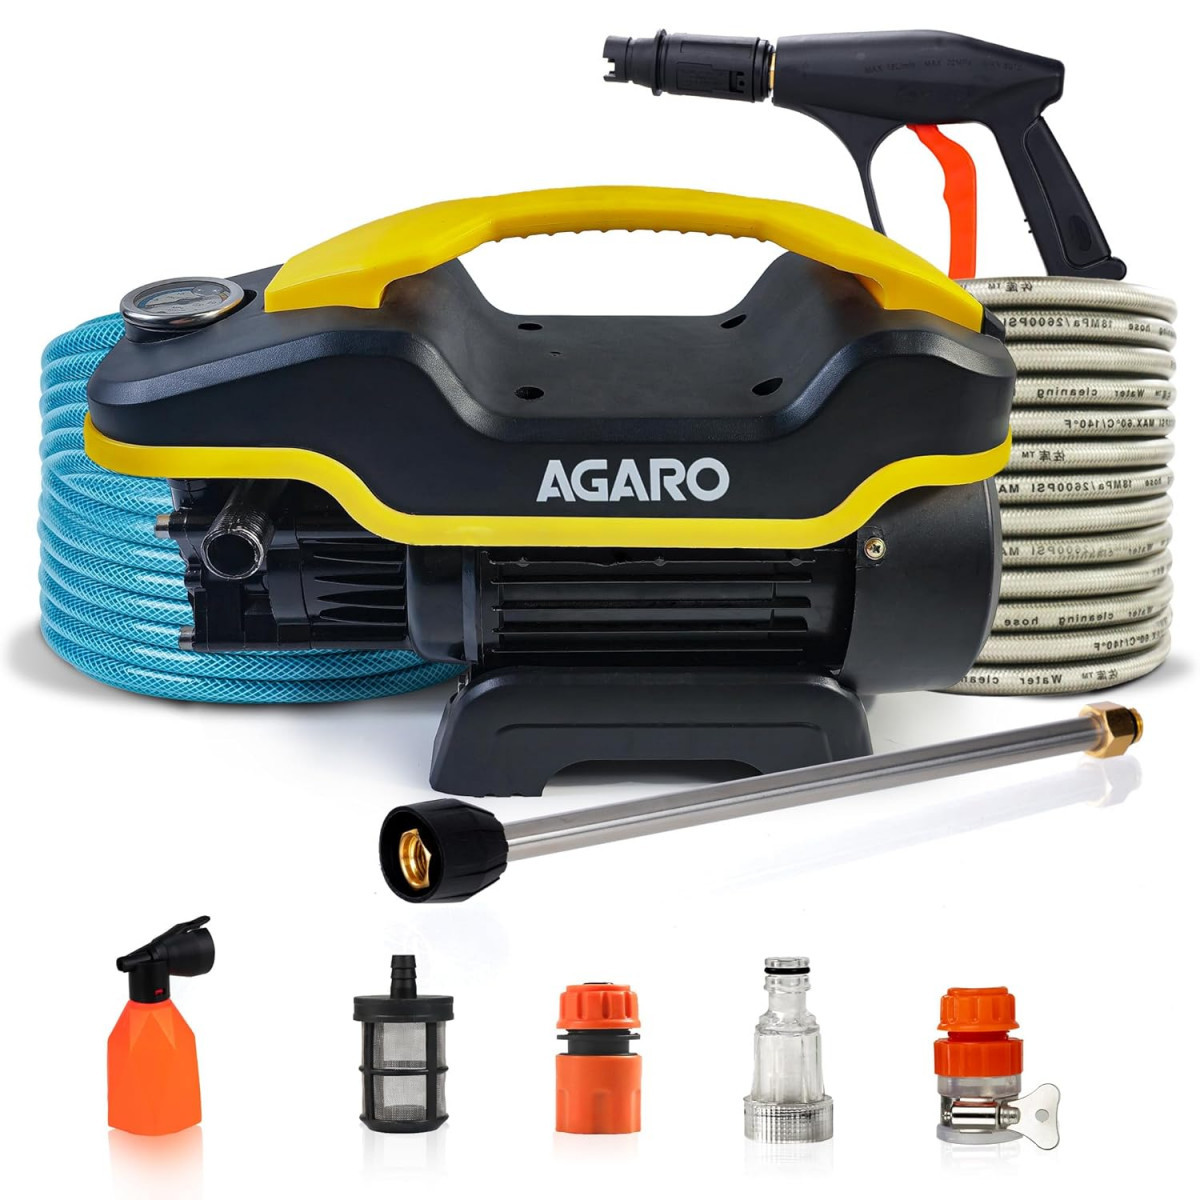 AGARO Galaxy High Pressure Washer Car Washer 1900 Watts Motor 130 Bars 7LMin Flow Rate 8 Meters Outlet Hose Portable Car Bike  Home Cleaning Purpose Yellow  Black